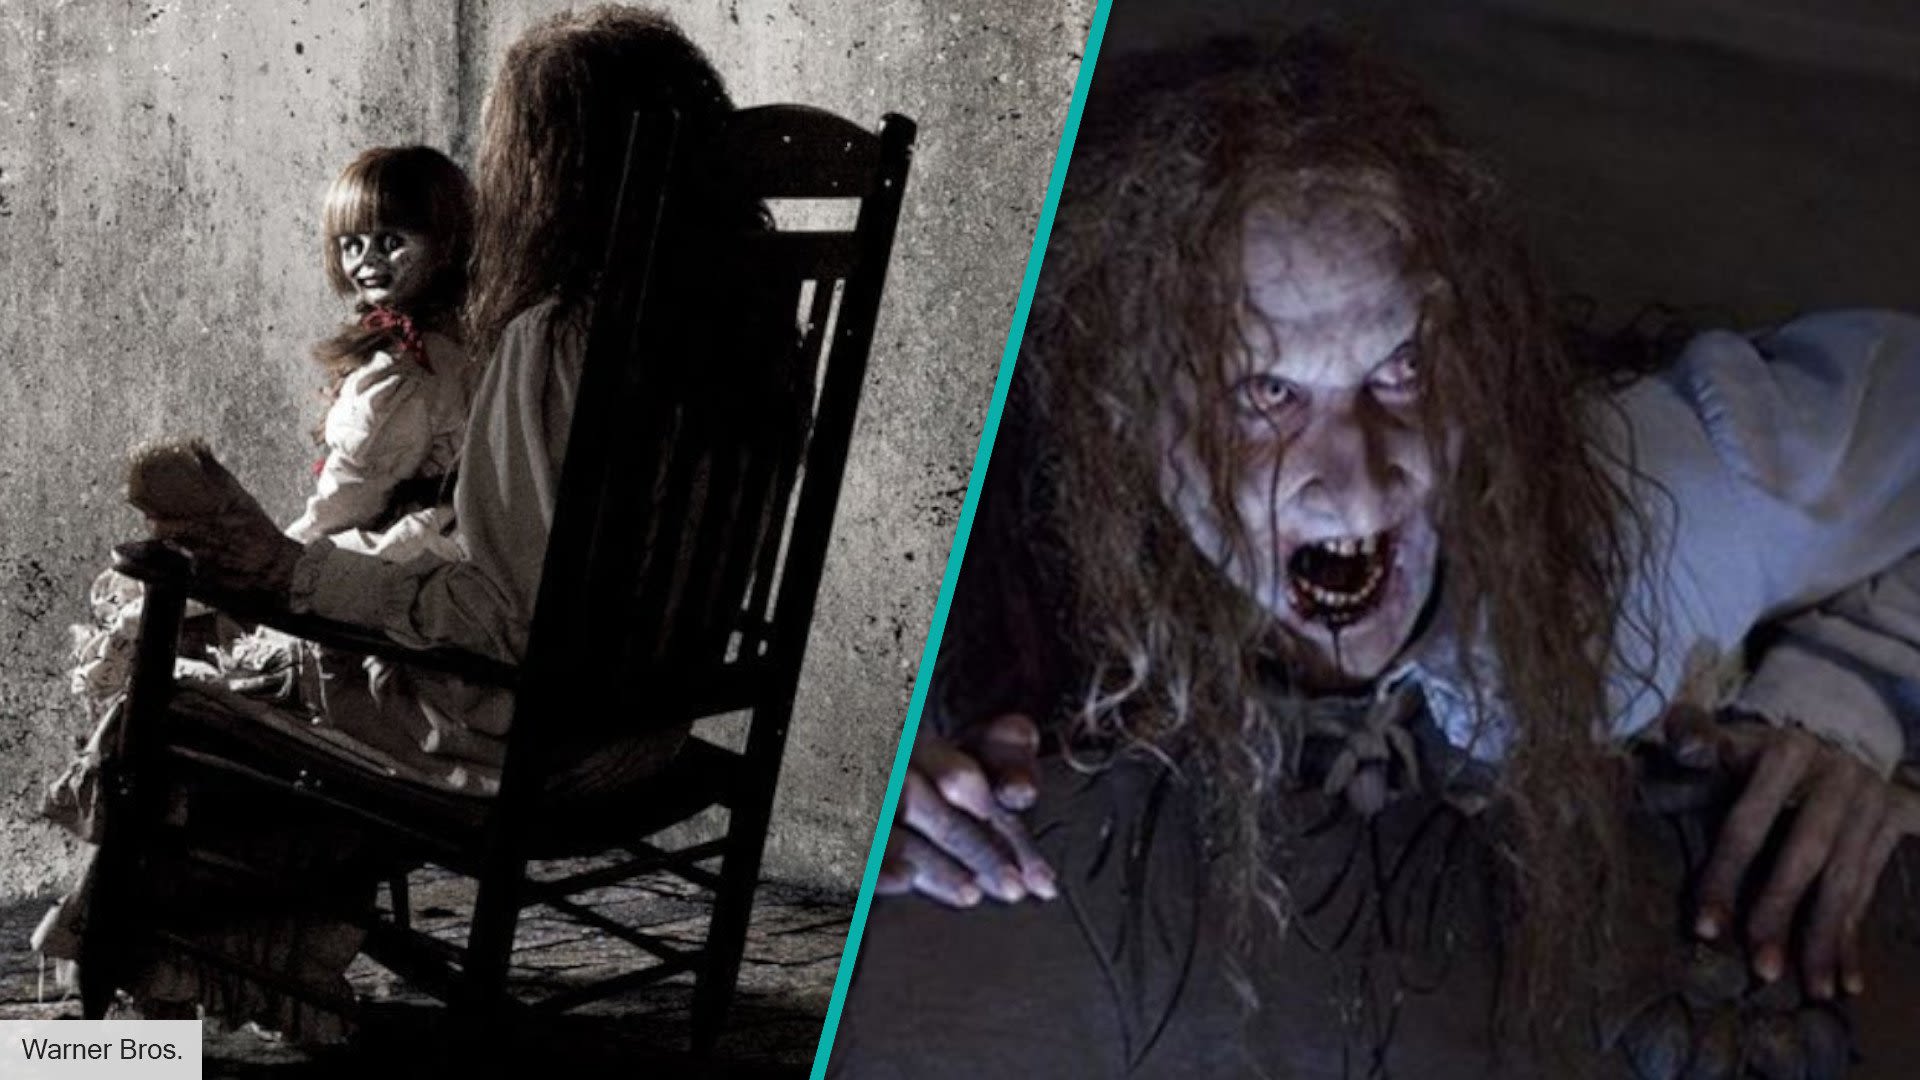 The sad true story of The Conjuring witch Bathsheba